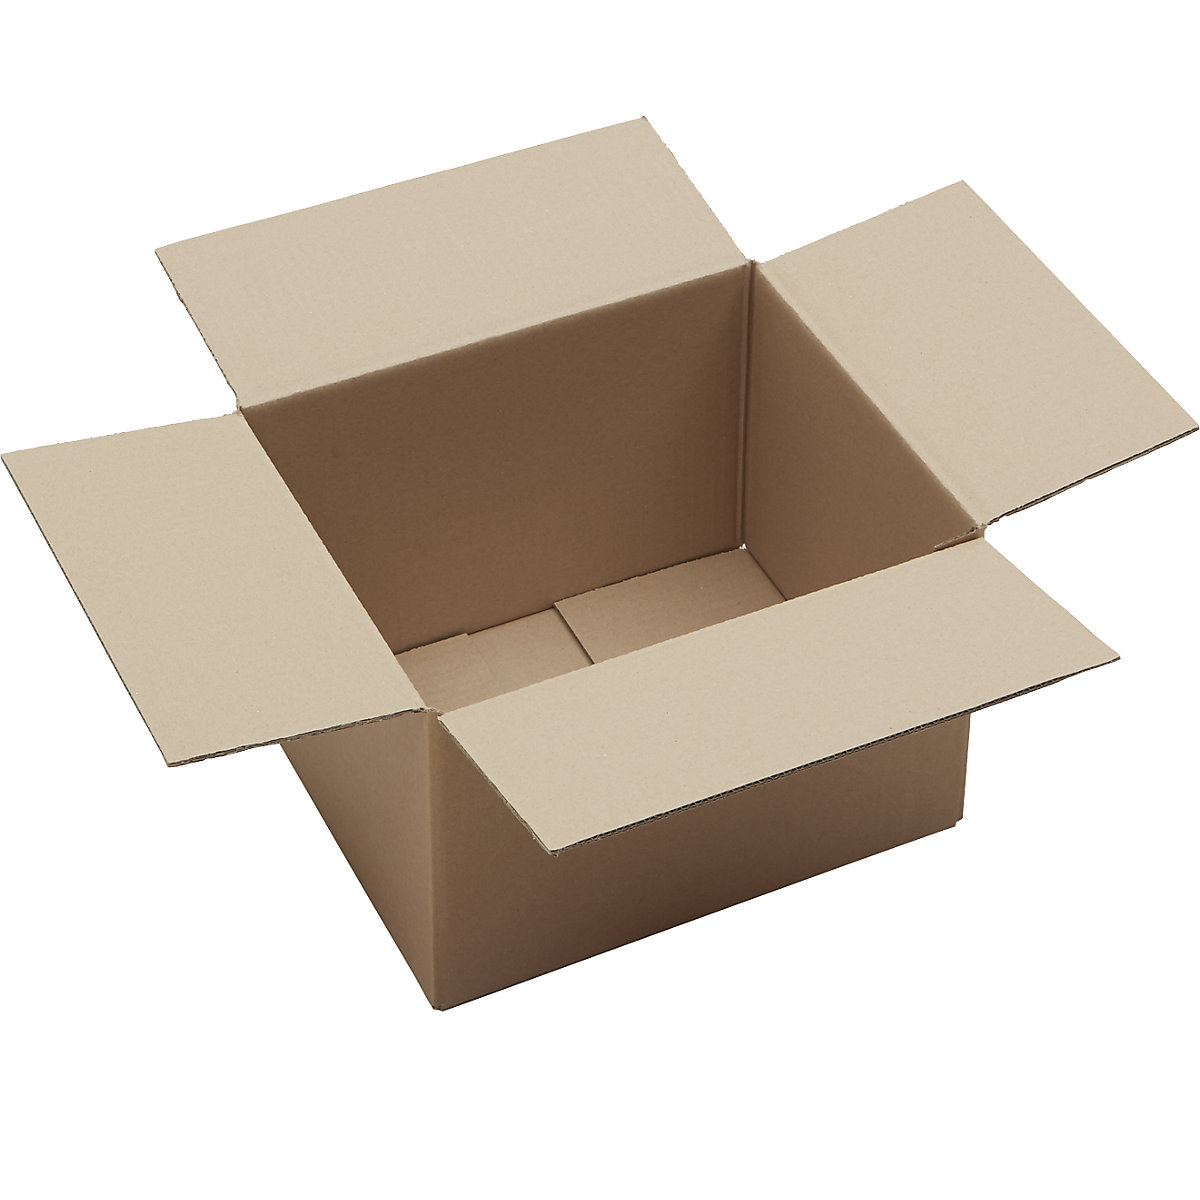 Corrugated cardboard folding boxes, FEFCO 0201, double fluted, pack of 50, internal dimensions 250 x 200 x 150 mm-1